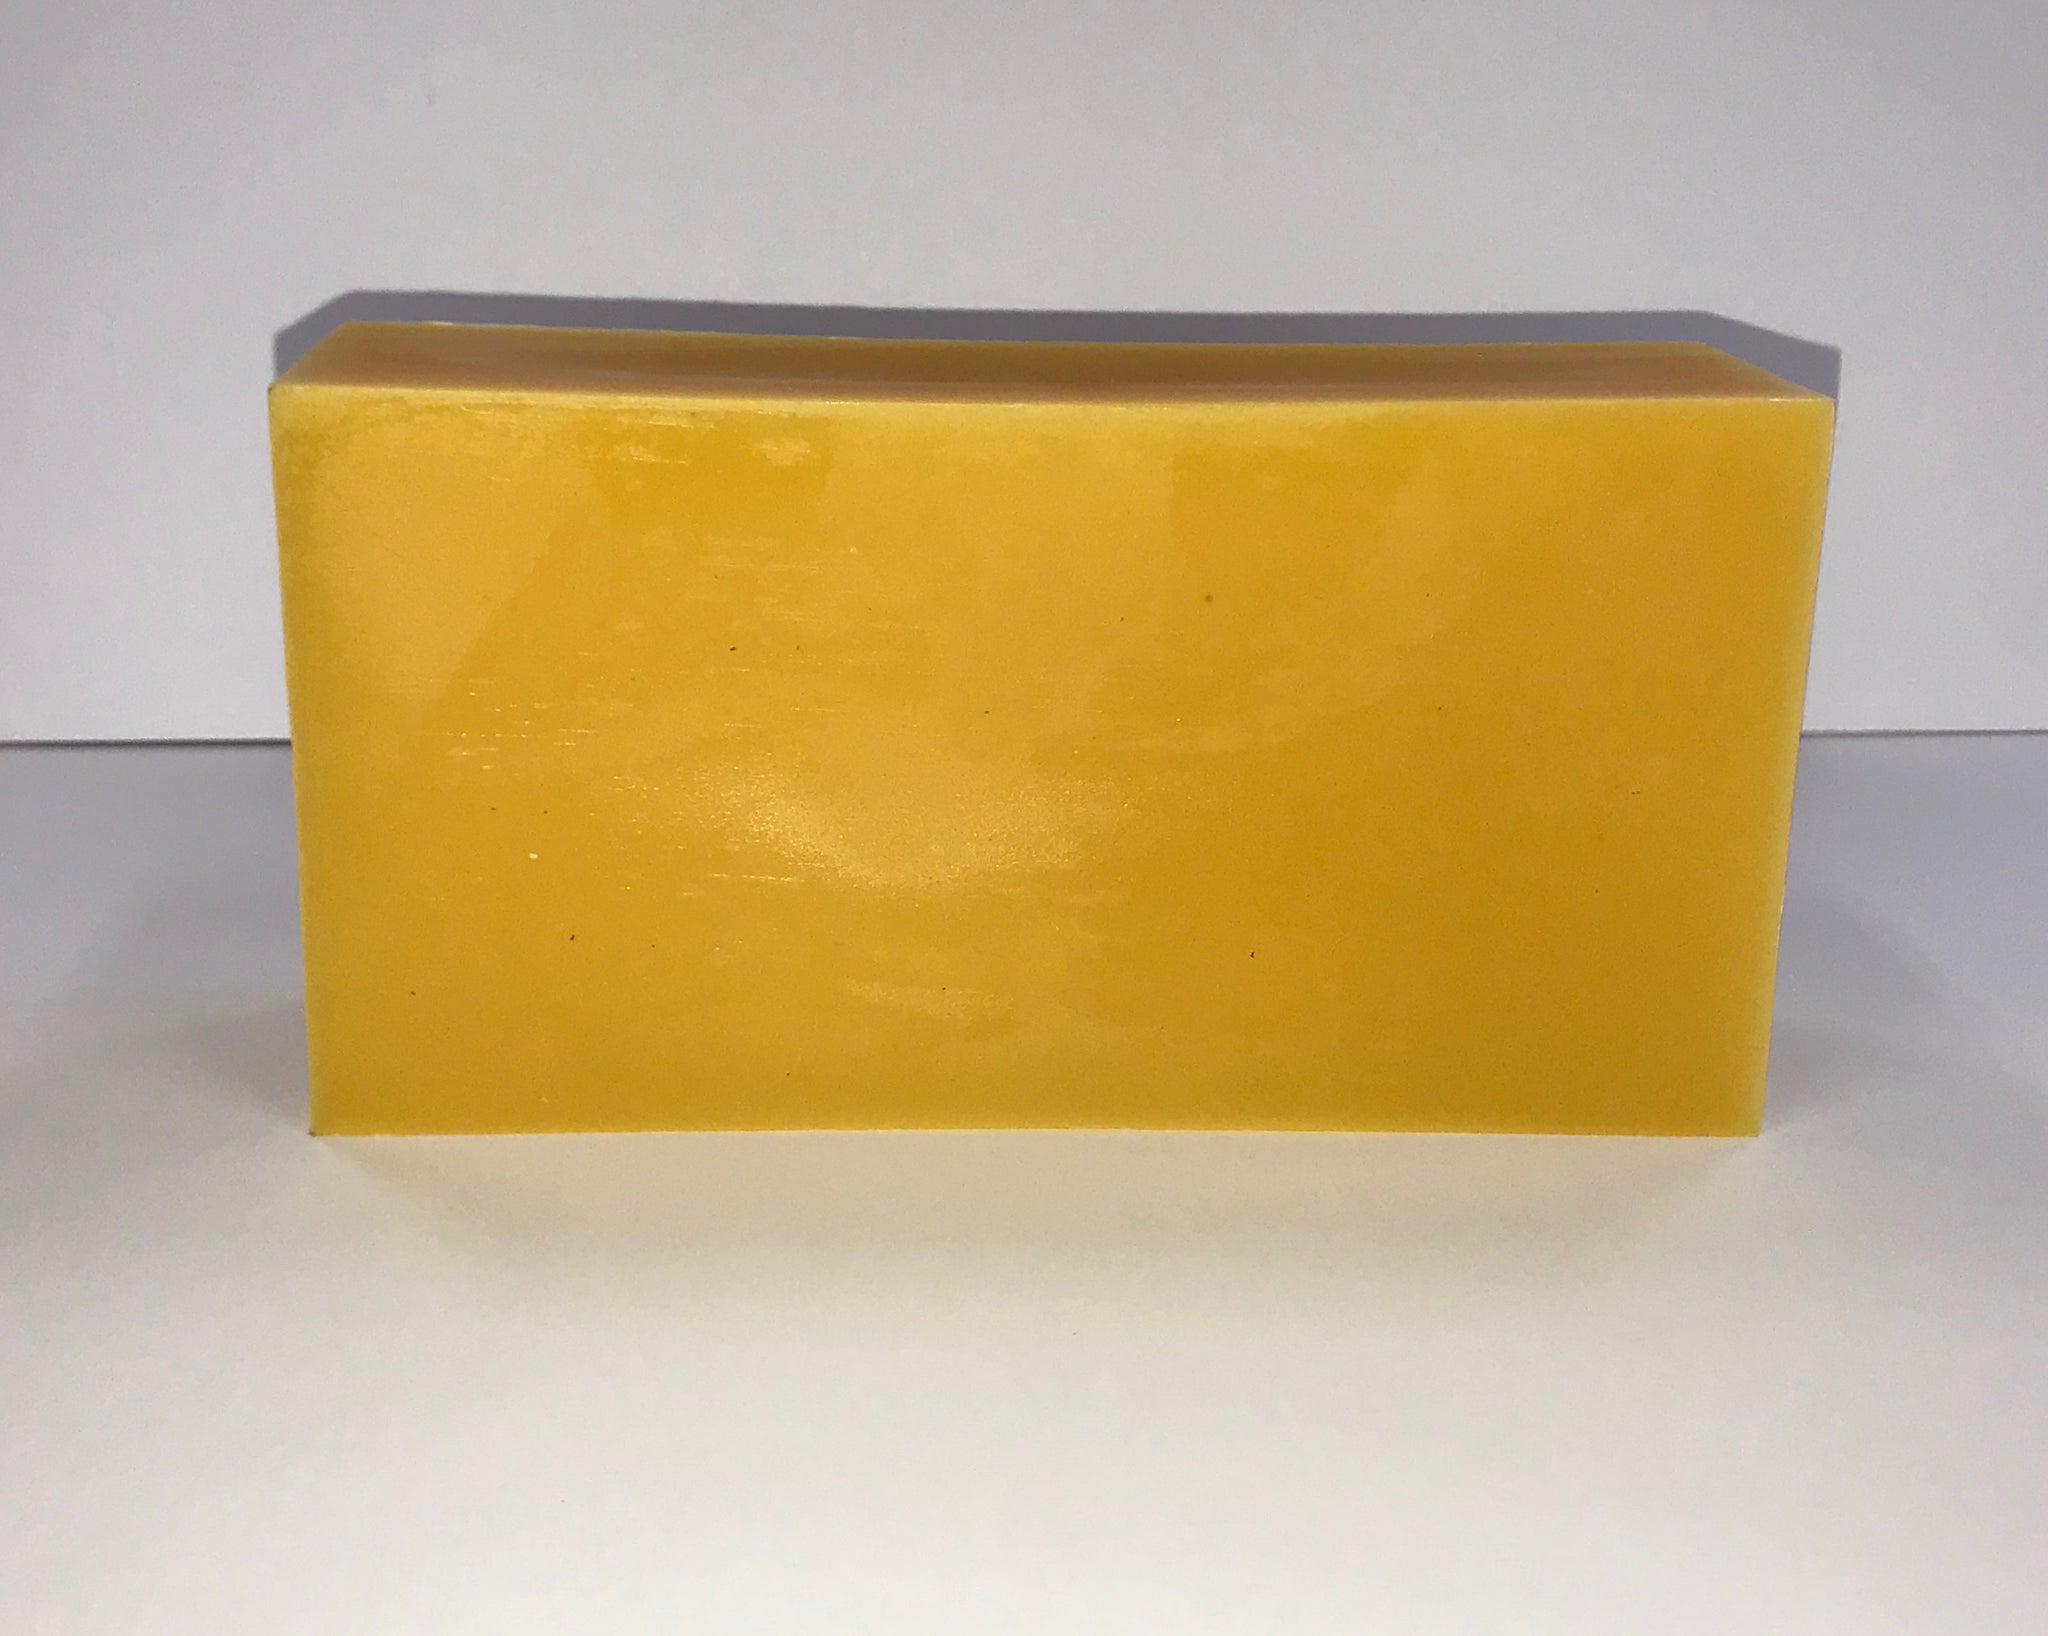 Beeswax Block: USA Triple Filtered (lb)